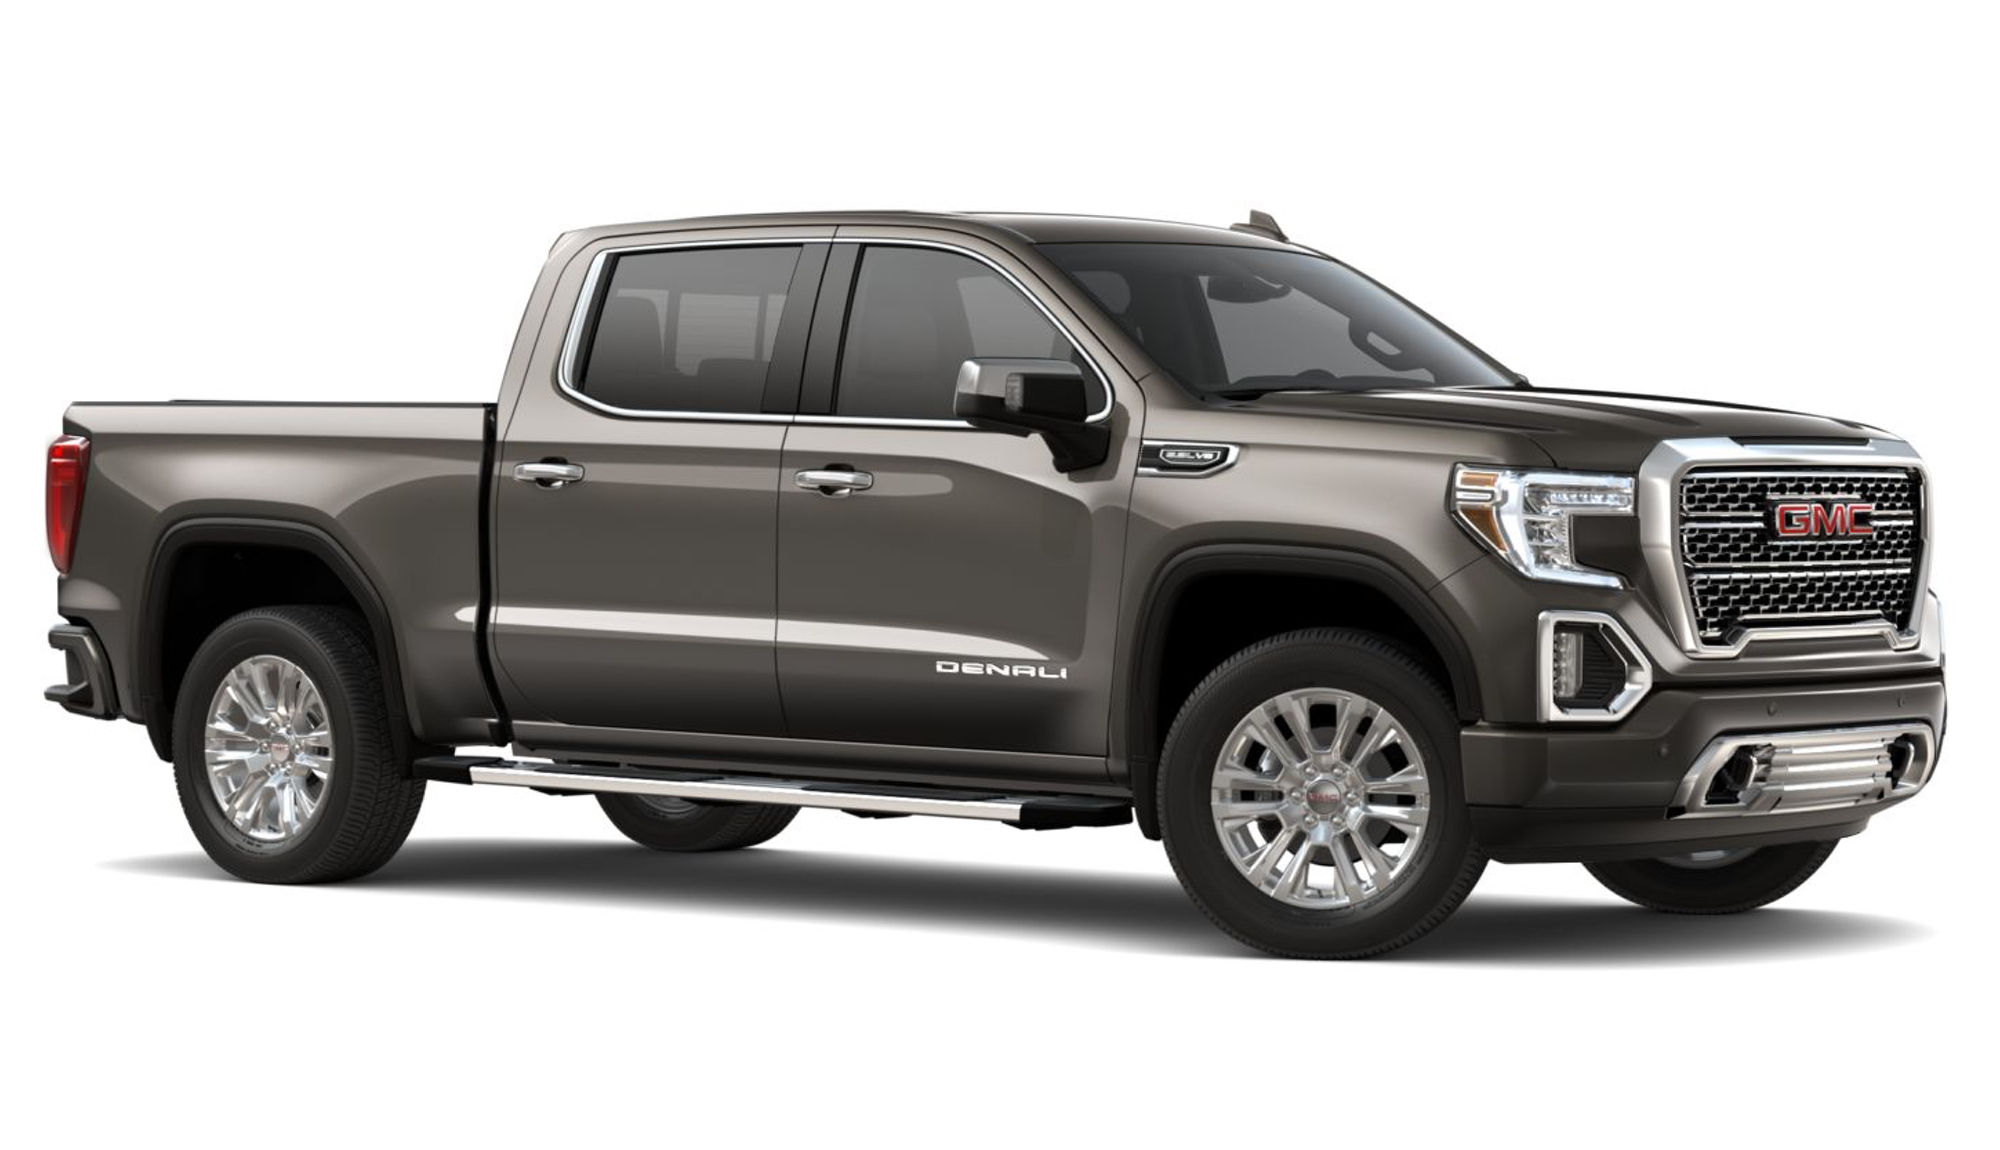 2020 Sierra 1500 Ditches This Paint Option, Gains New One GM Authority